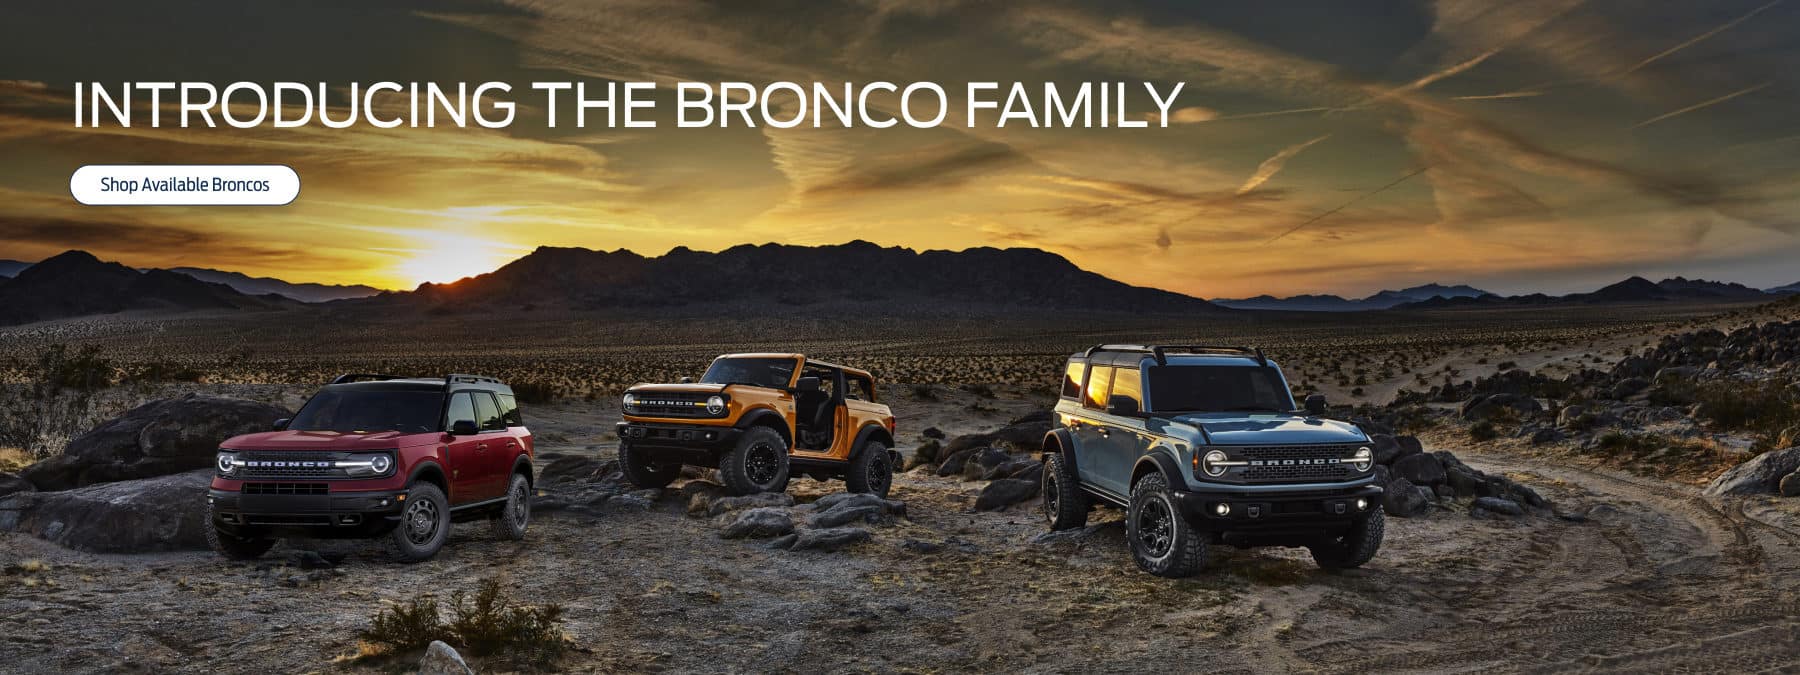 INTRODUCING THE BRONCO FAMILY | Best Ford Nashua NH